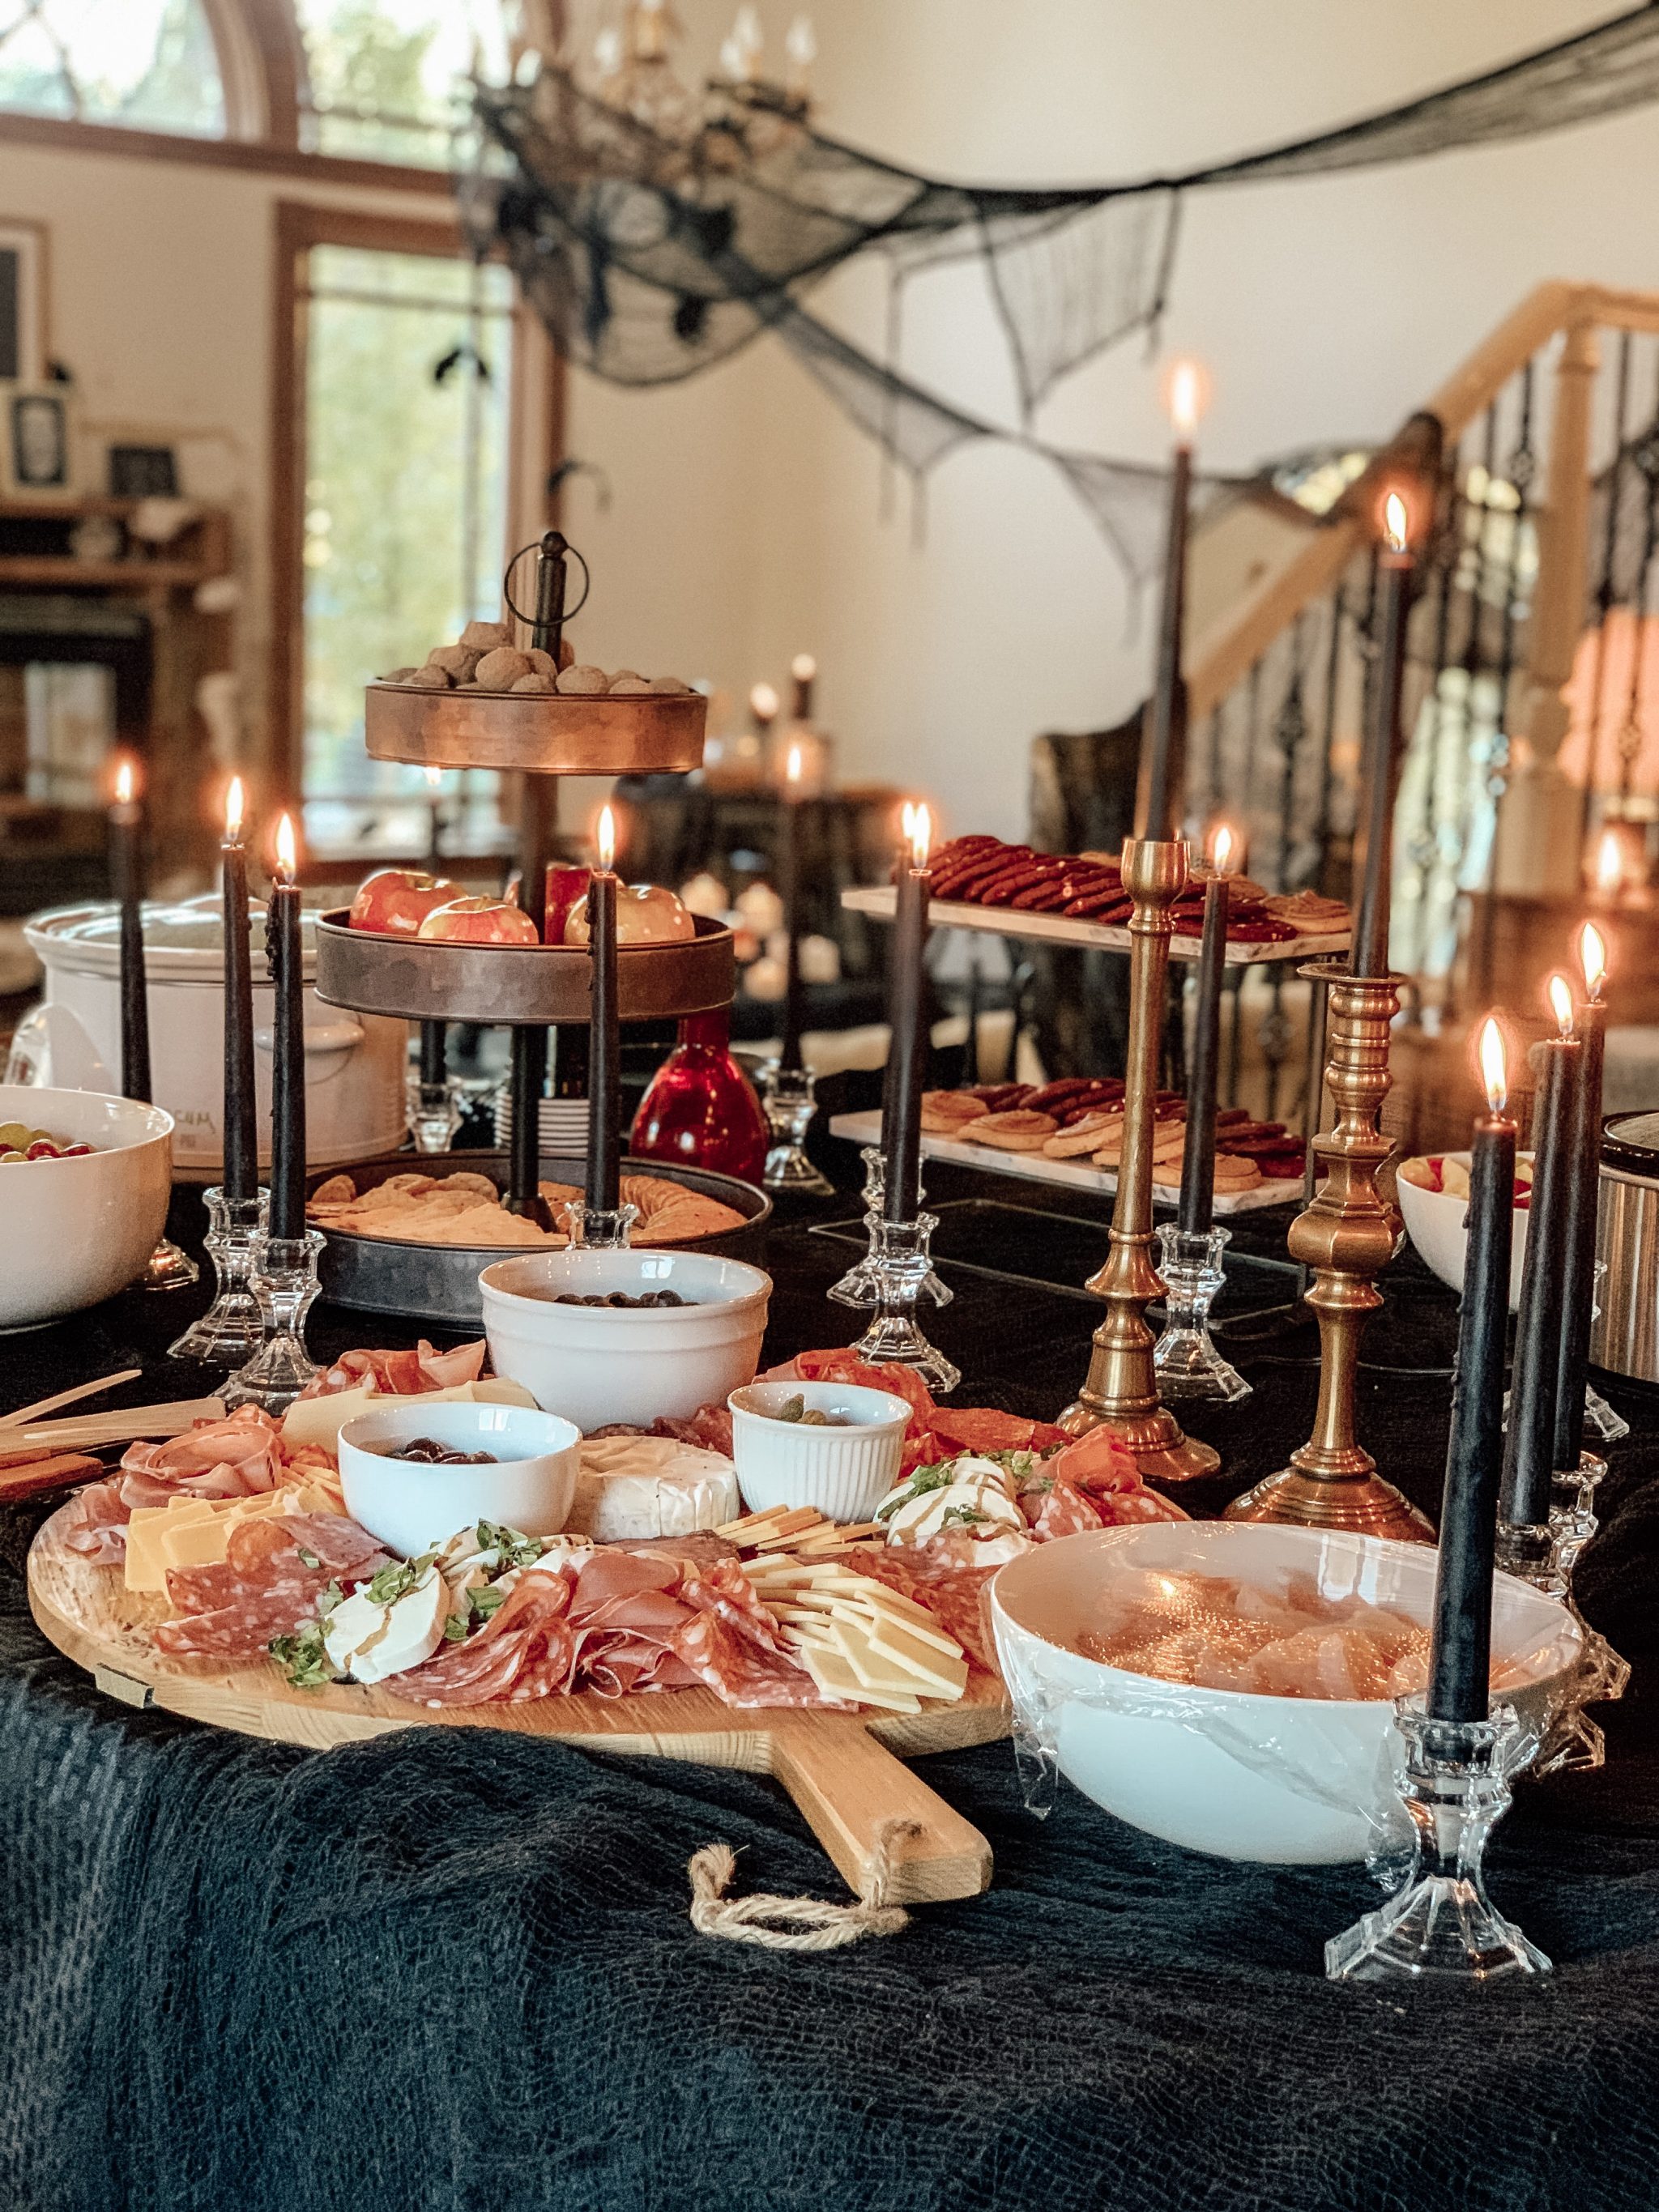 Halloween Murder Mystery Dinner Party w/ Carter Cooks — AT THE LANE